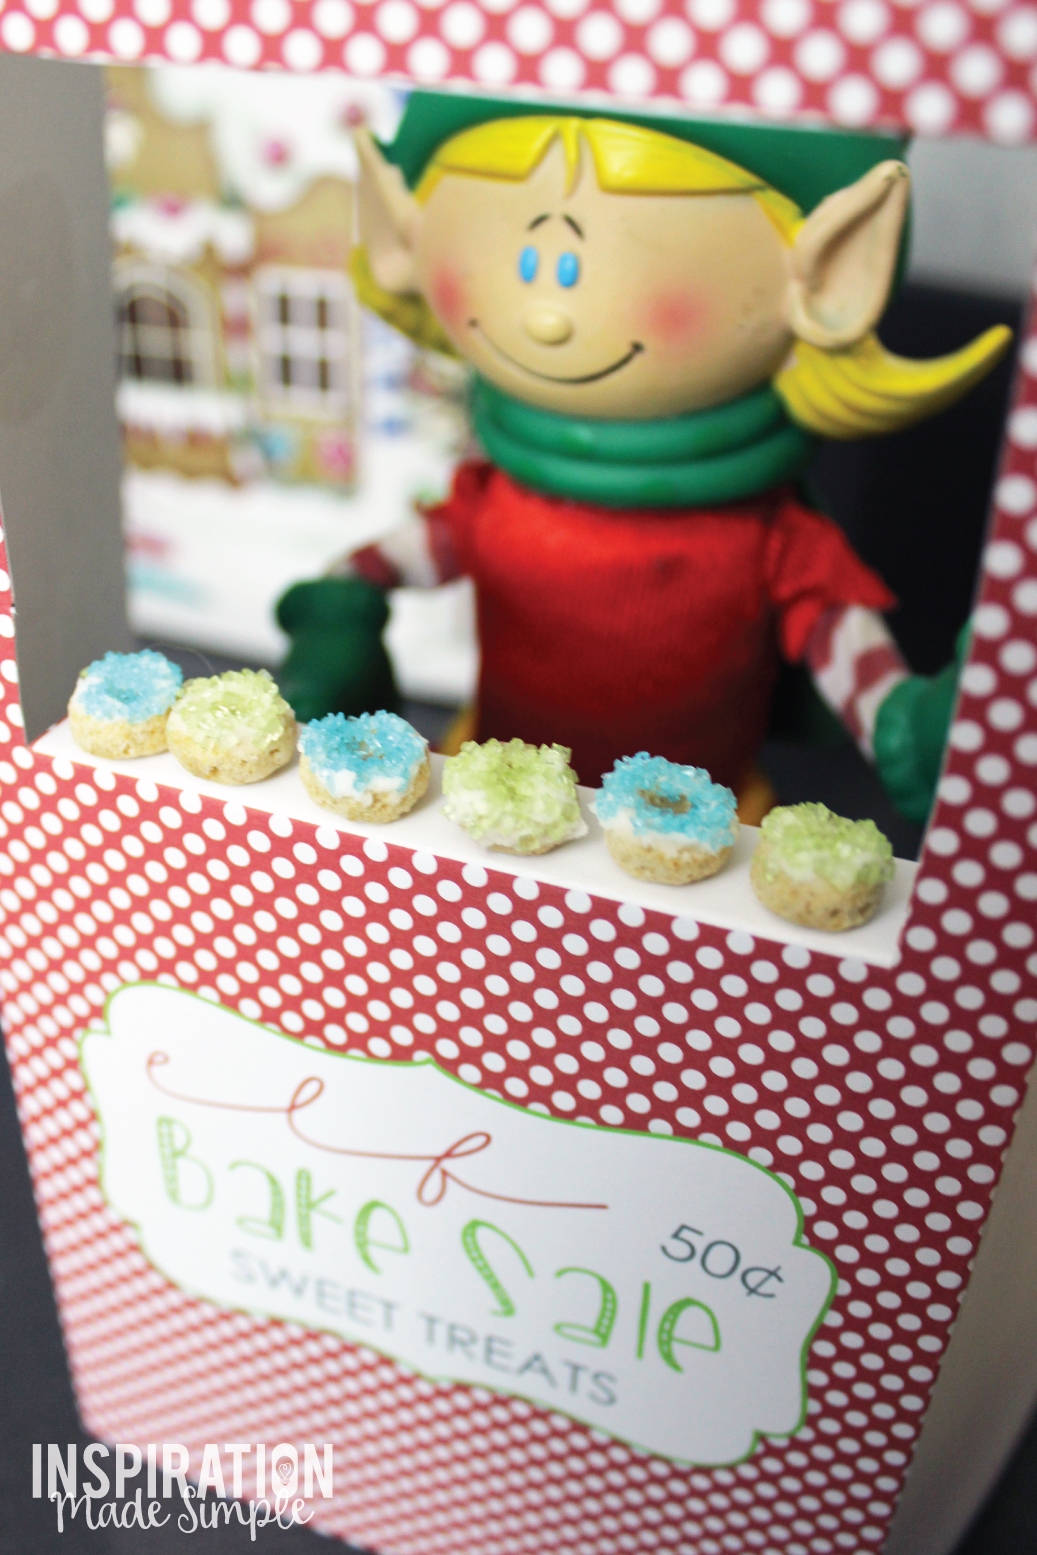 Free Printable Elf on the Shelf Bake Sale Stand - add some delicious "Cheerios" Donuts to complete the stand!